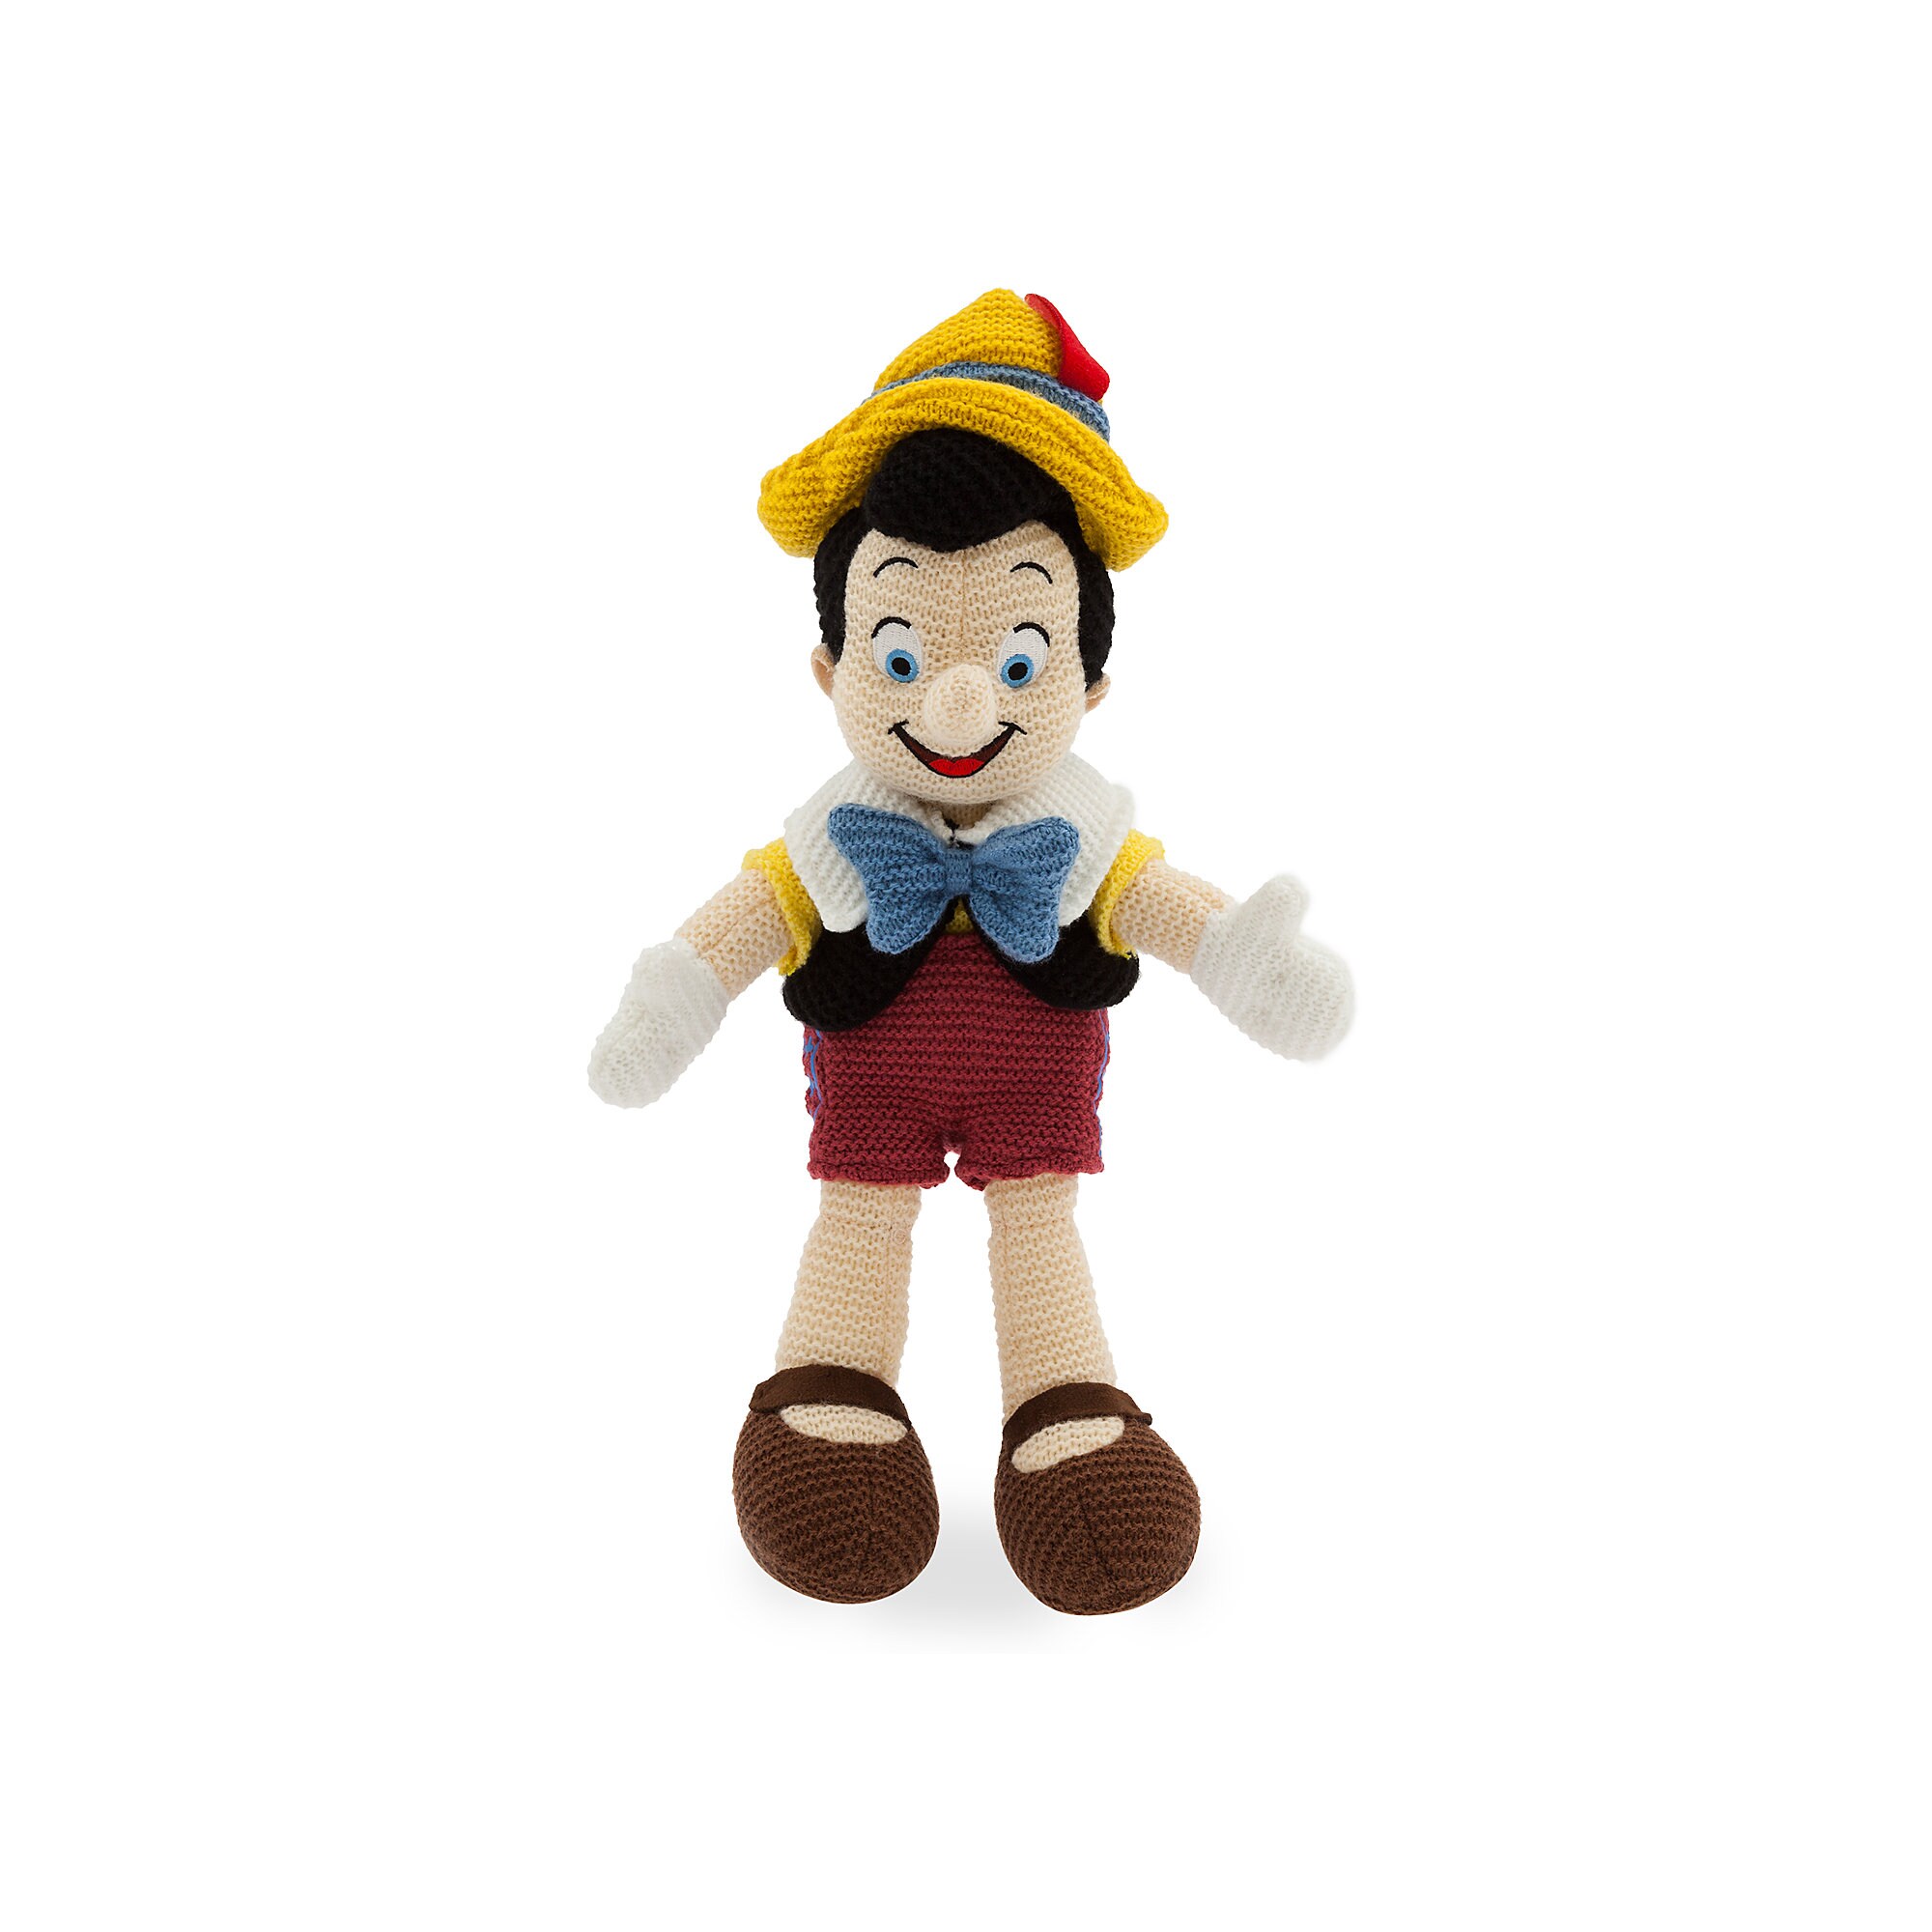 Pinocchio Knit Plush - 14'' - Limited Release